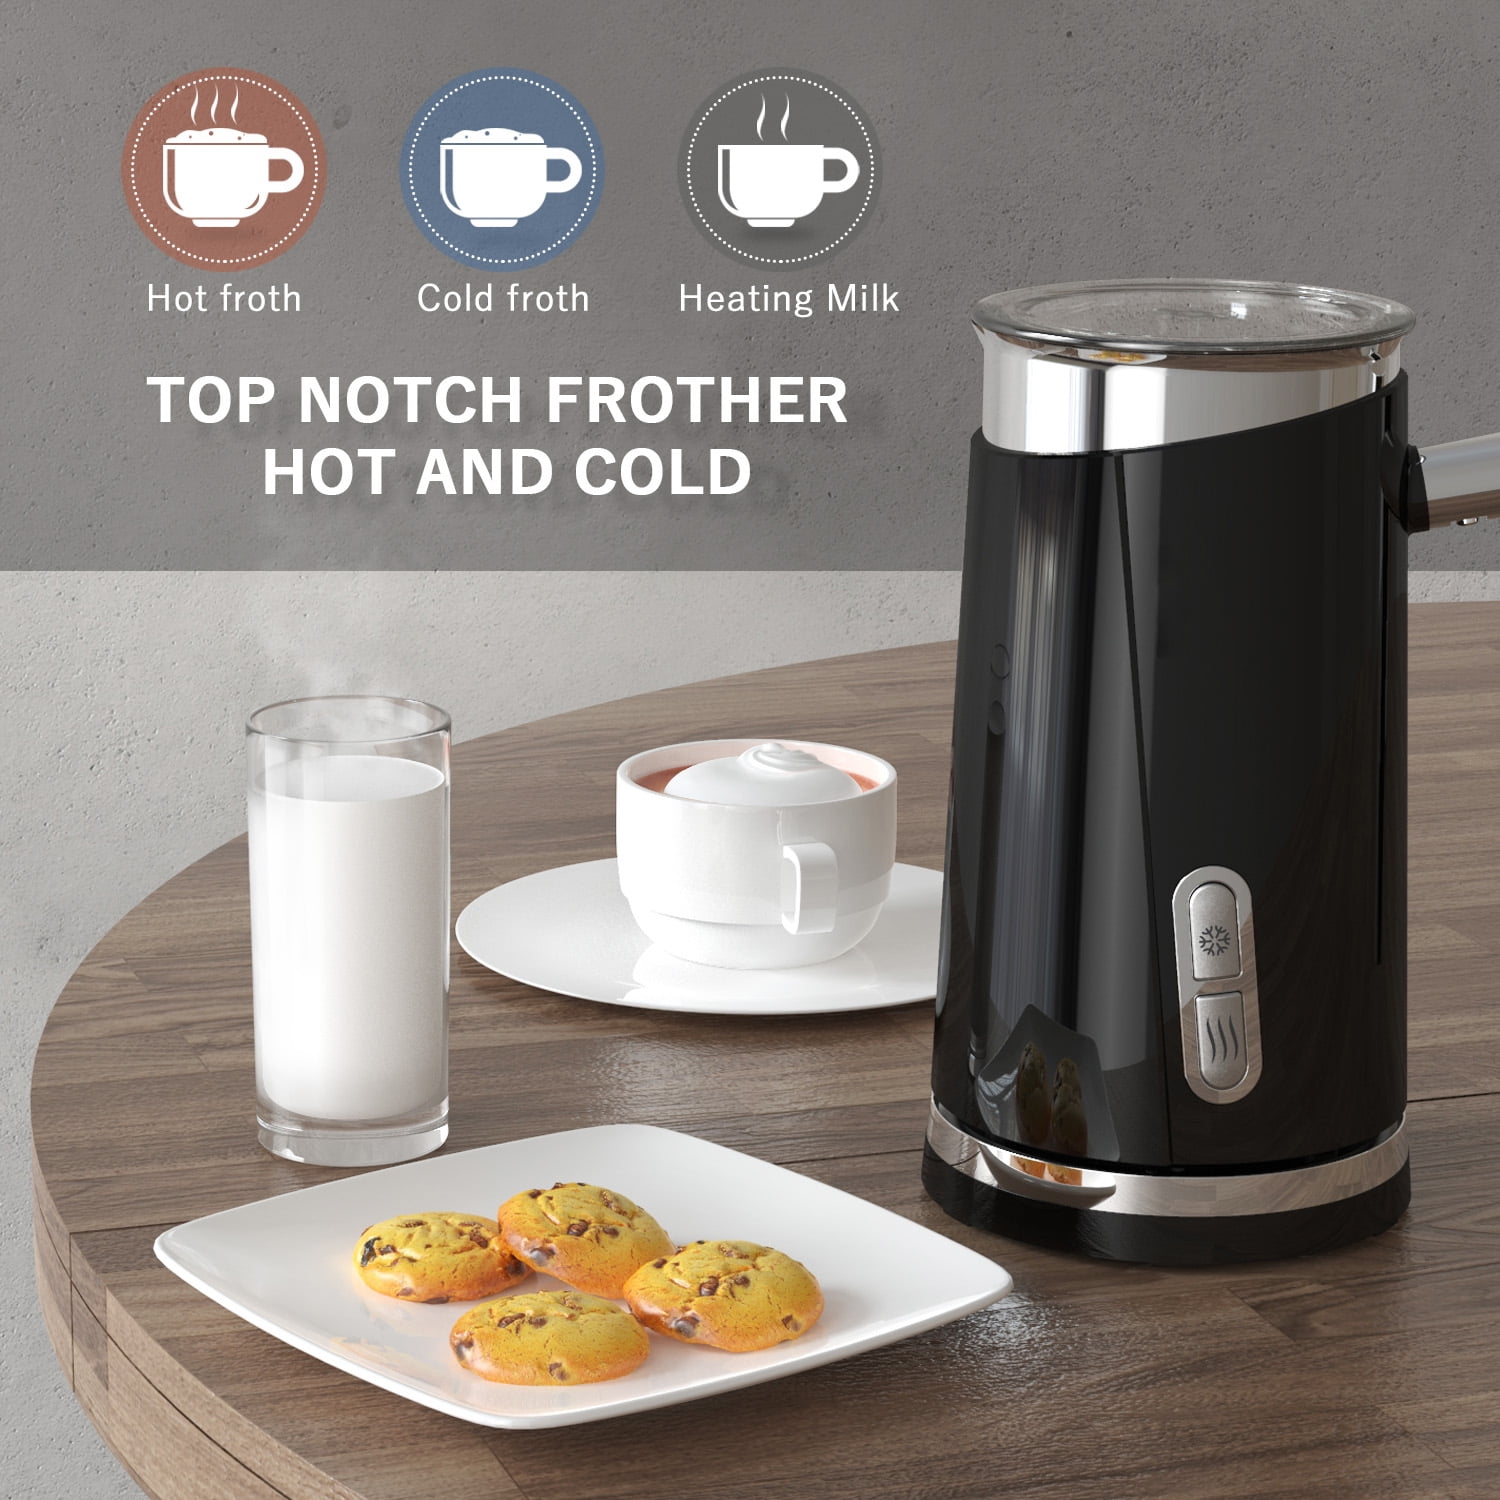 Huogary Automatic Milk Steamer, Milk Frother and Steamer with Hot and Cold  Froth Function, Hot Chocolate Maker and Electric Milk Heater, Foam Maker